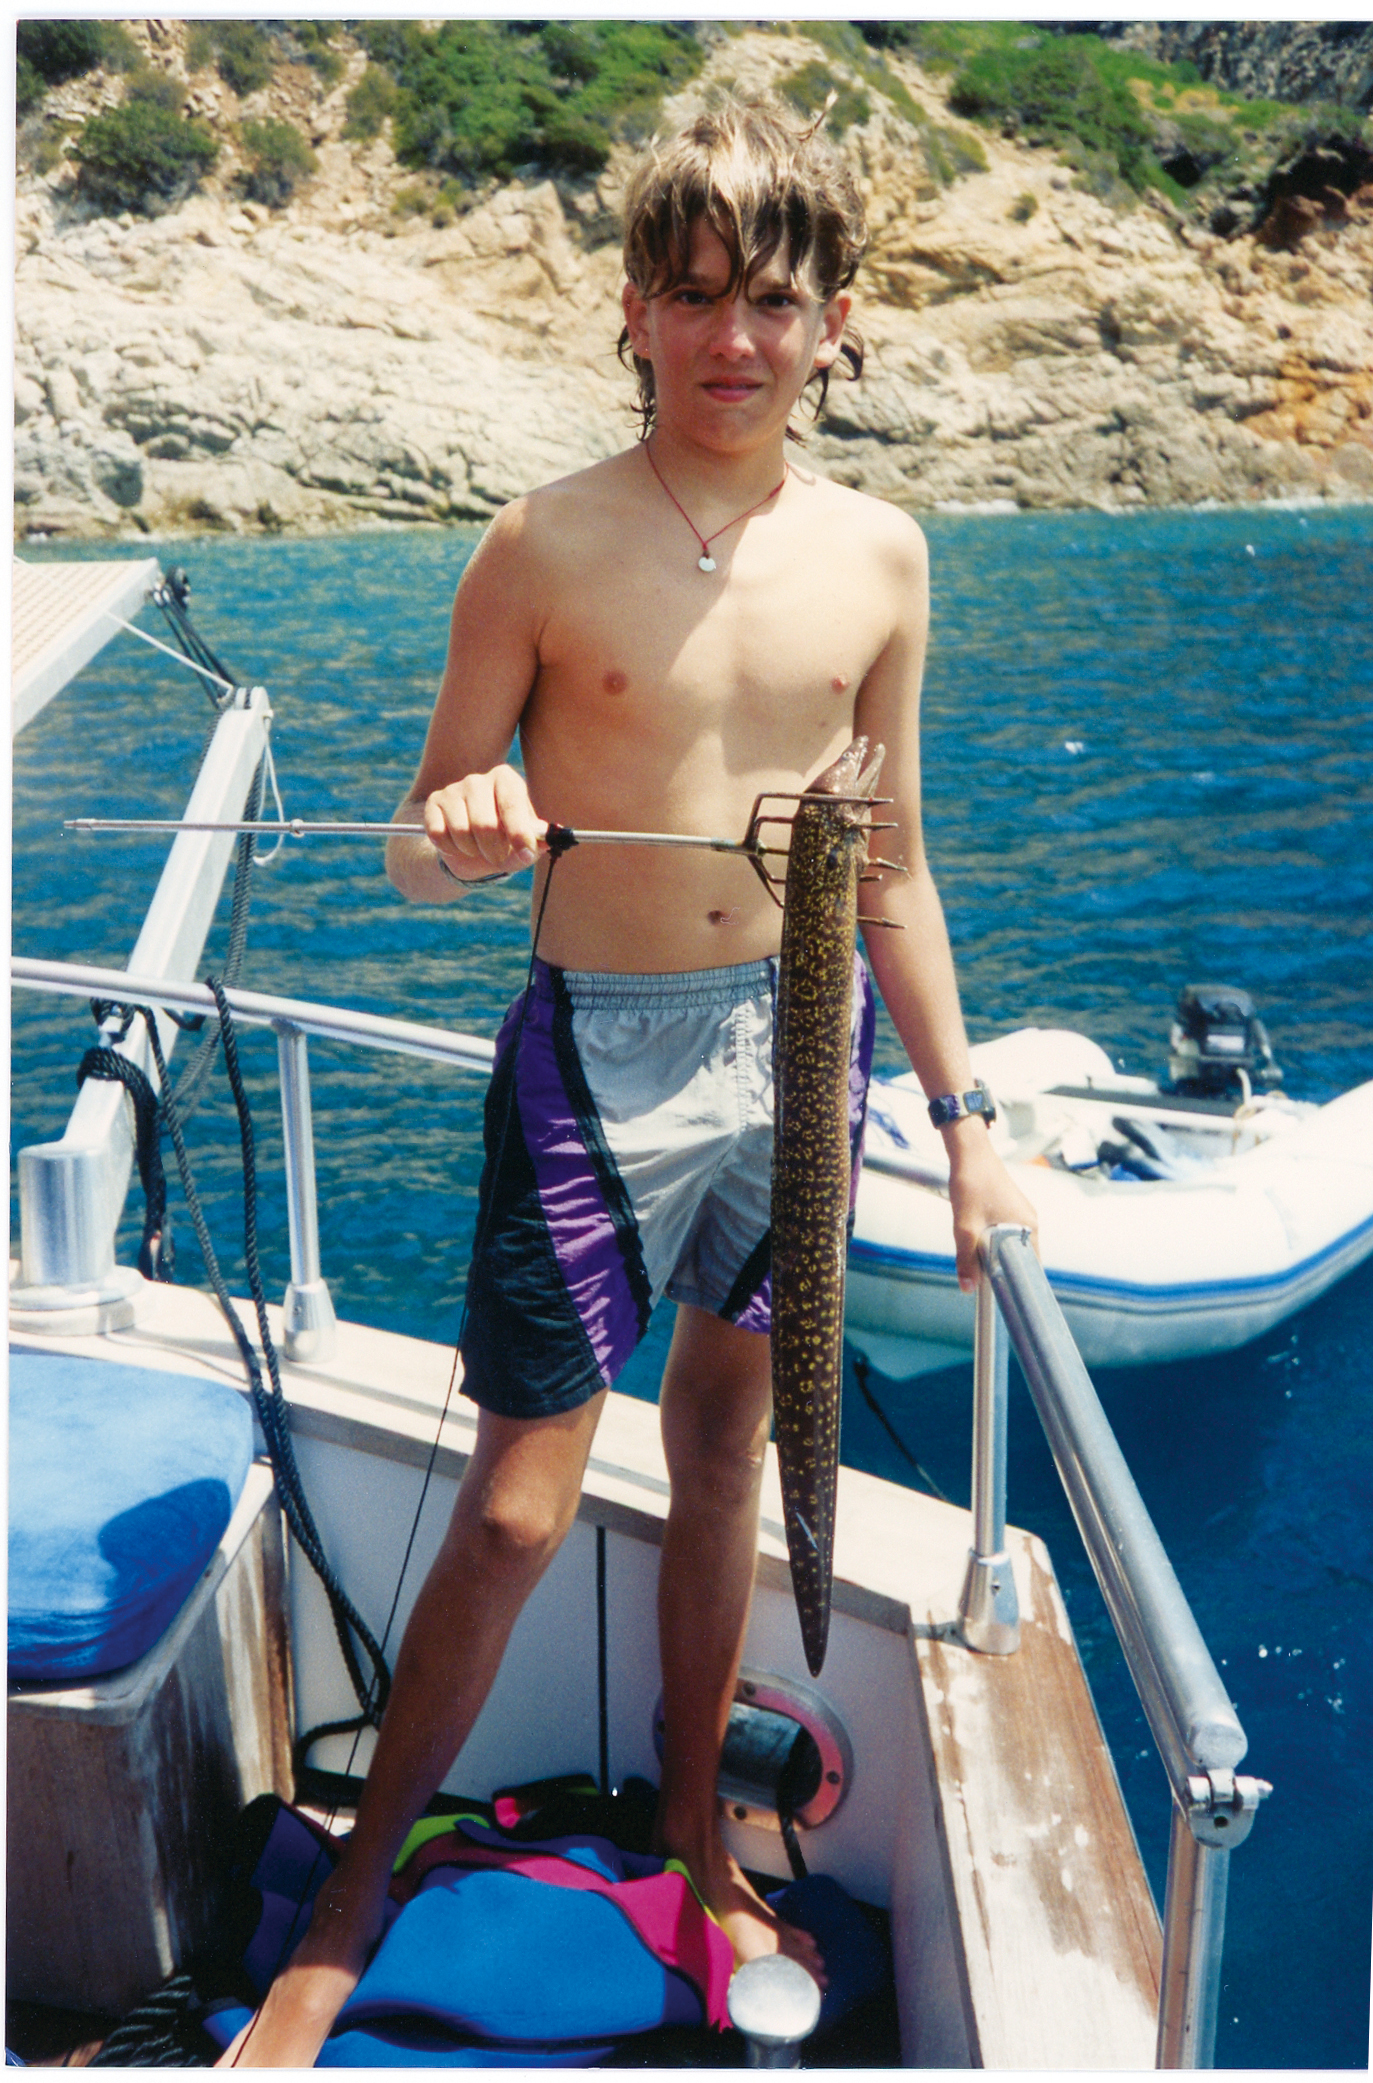 Eel for dinner, again? Don Jr. doesn't look
                              too happy about it. Summer in Greece,
                              1993.